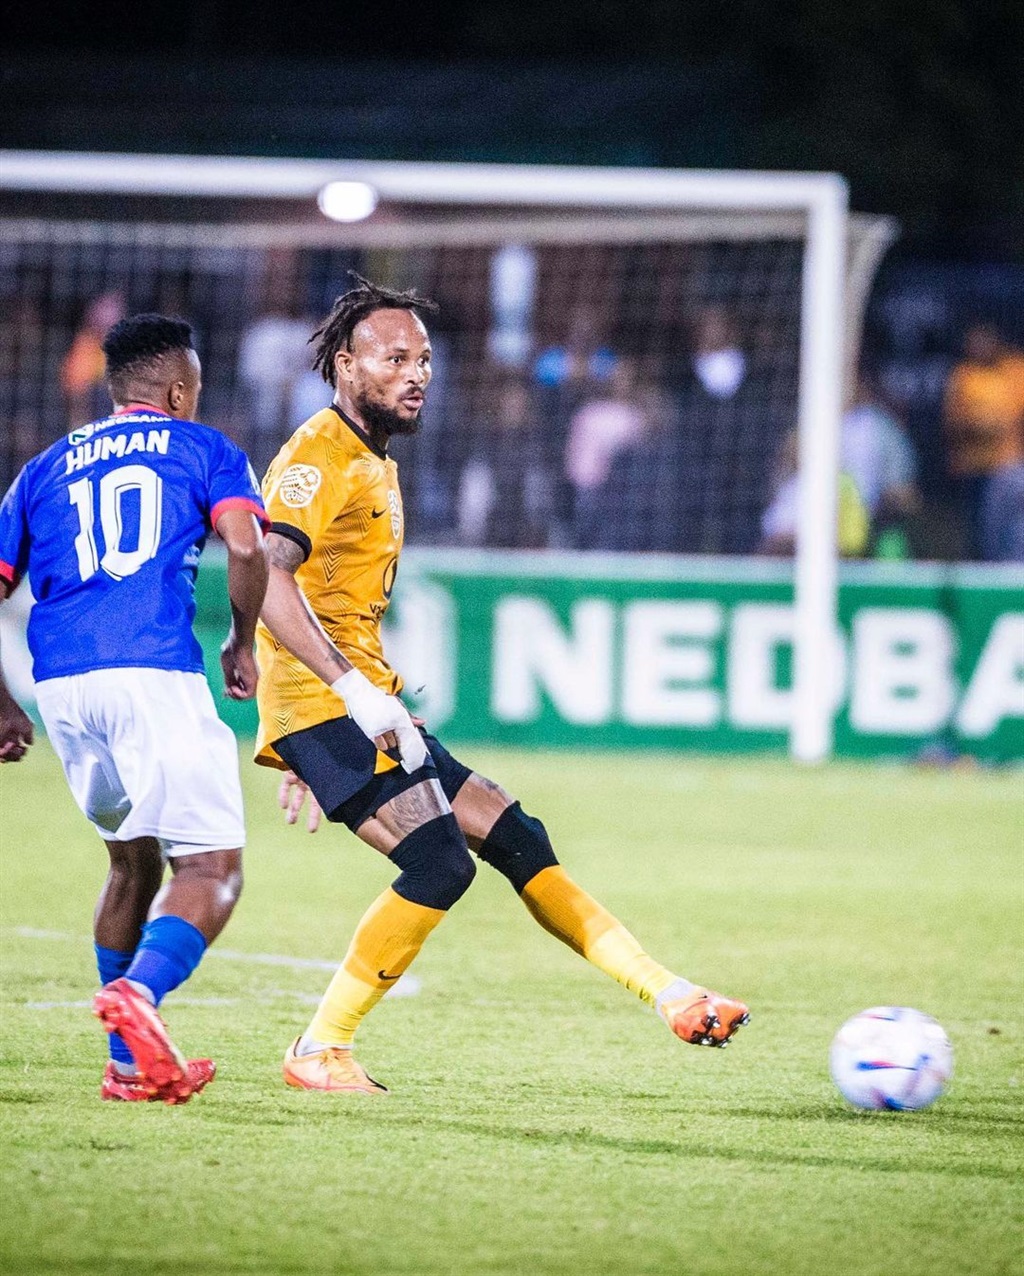 Kaizer Chiefs advanced to the Round of 16 of the N